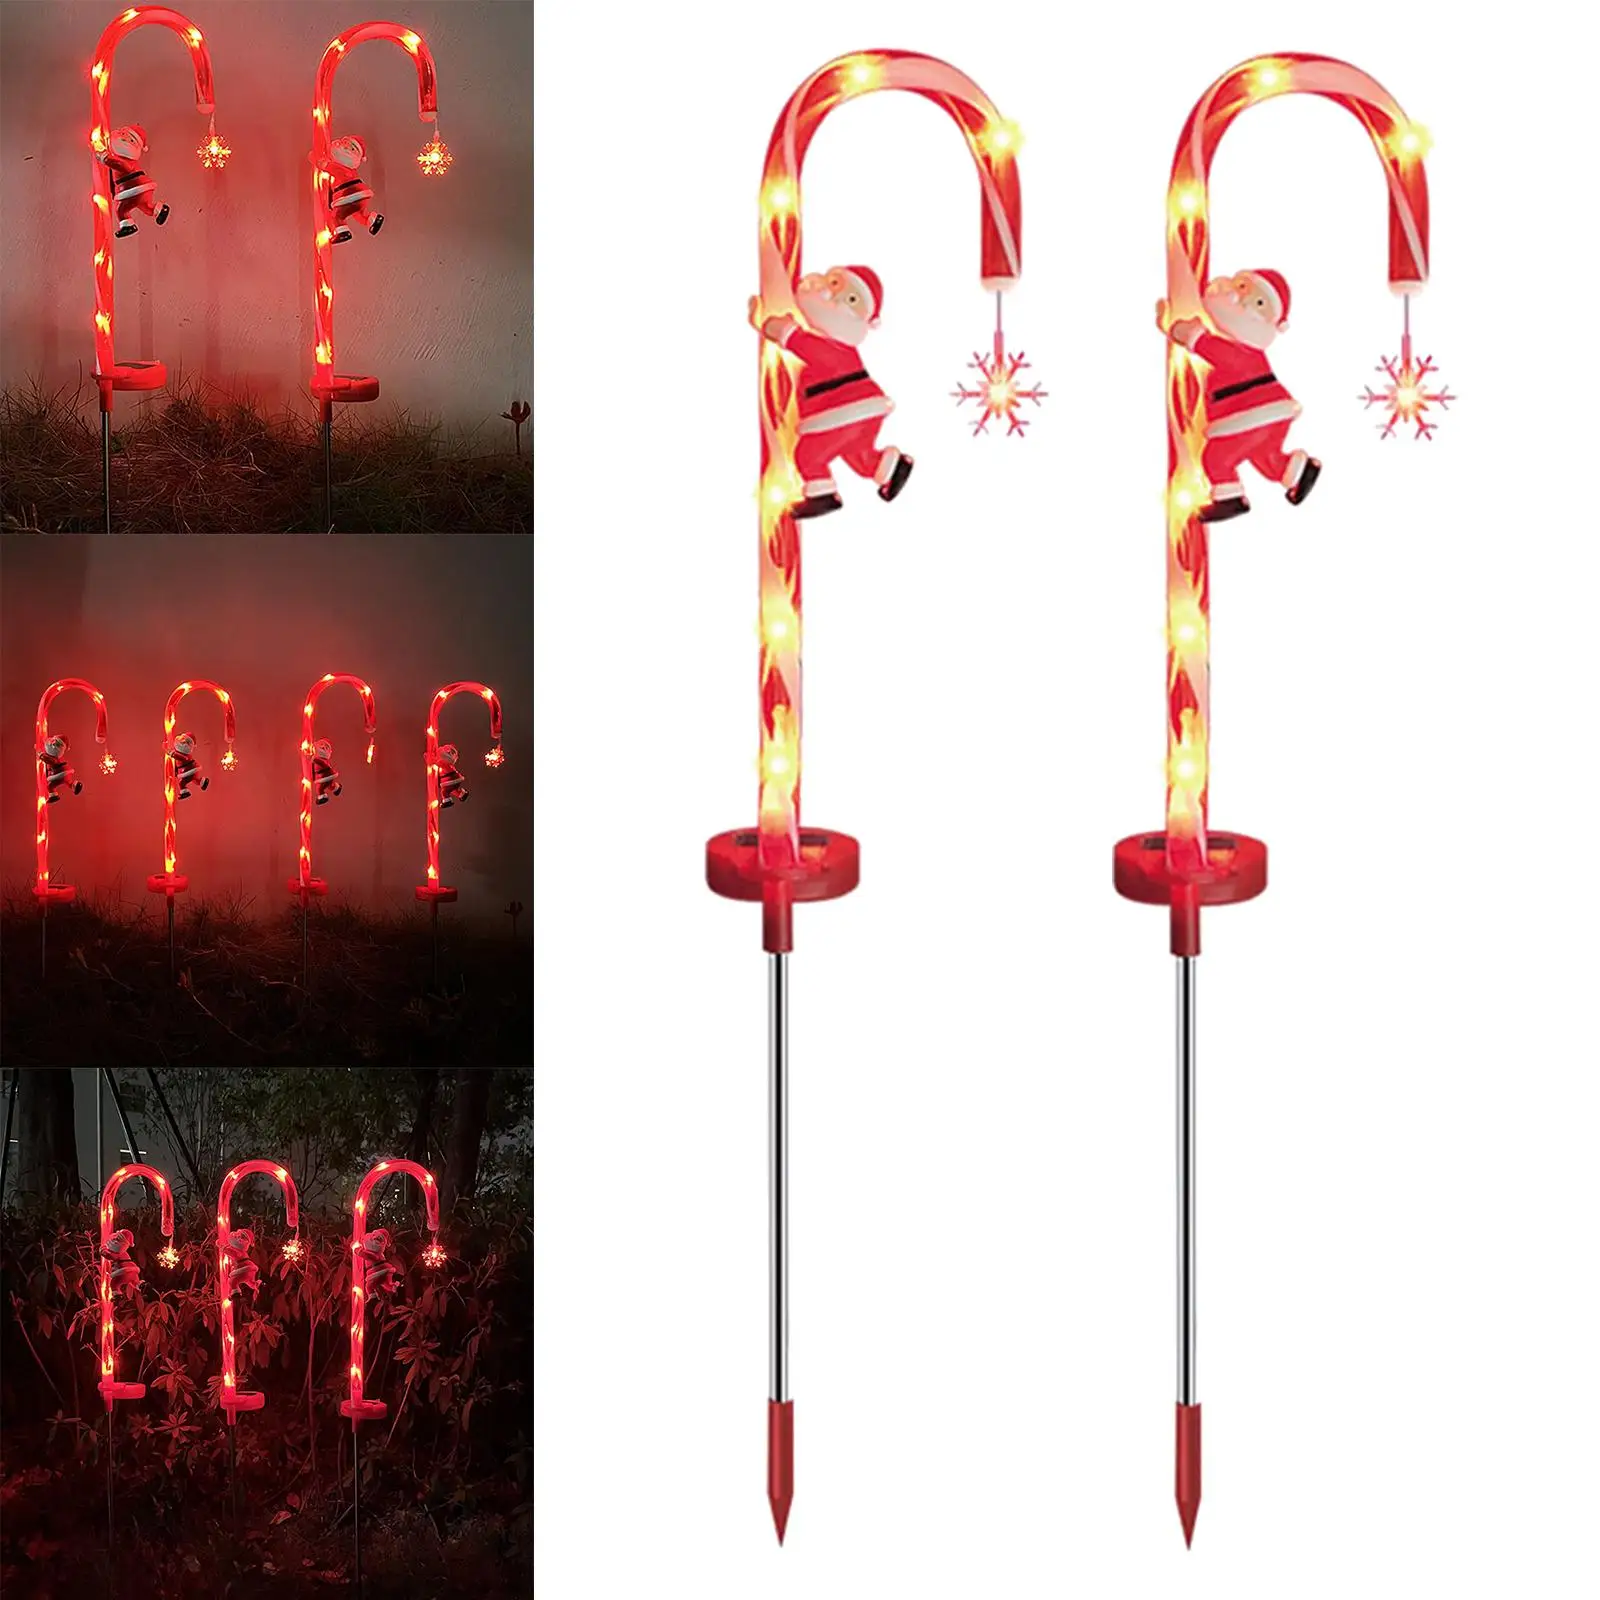 Waterproof Christmas LED Lamps Pathway Decorations with Ground Stake Candy Cane Solar Powered Lights for Garden Fence Outdoor